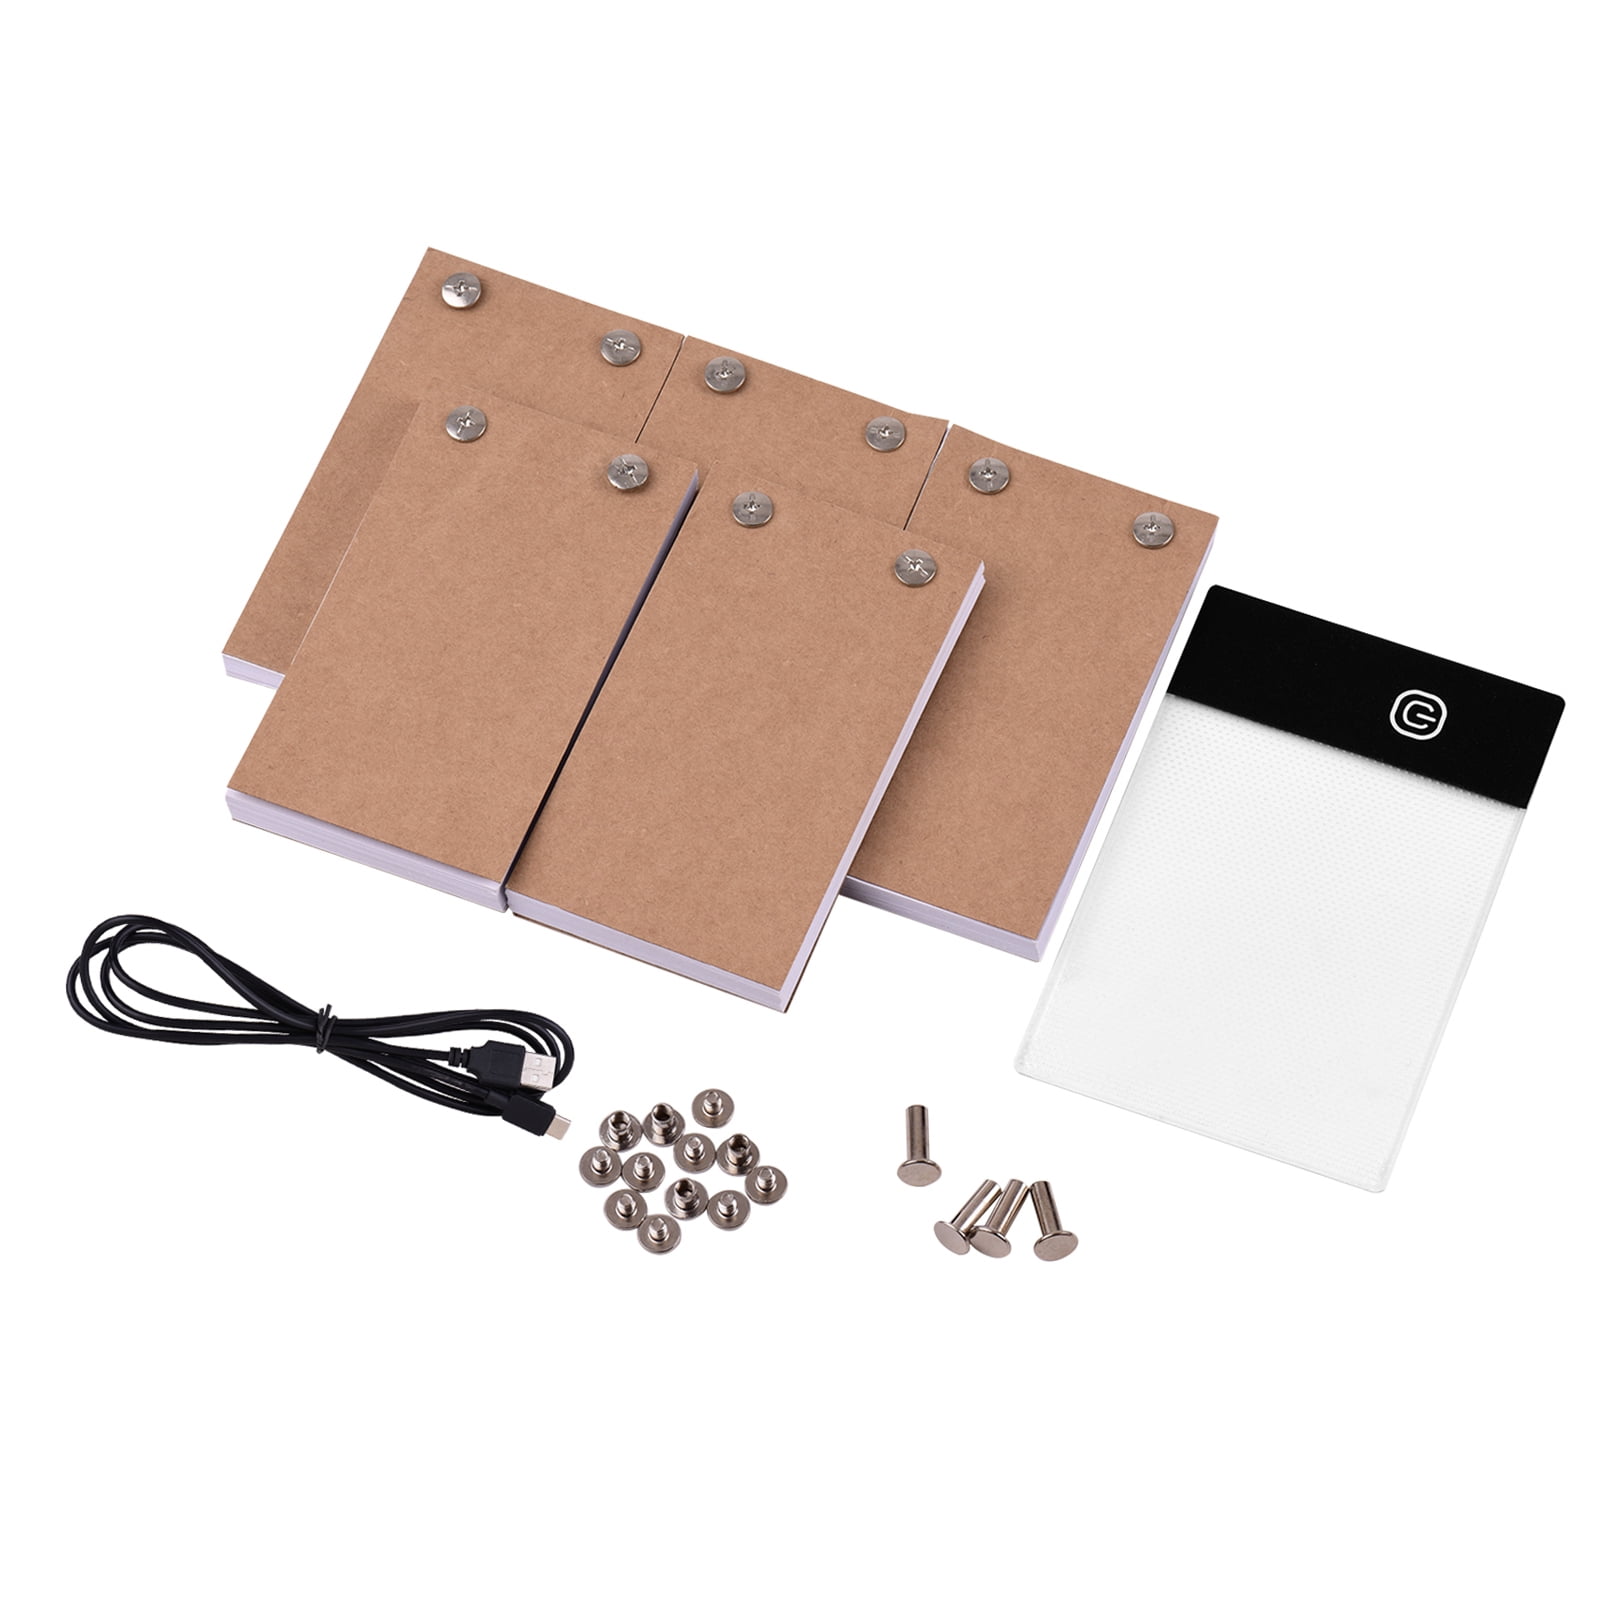 Flip Book Kit with Light Pad LED Light Box Tablet 300 Sheets Drawing Paper with Binding Screws for Drawing Animation Sketching Cartoon Creation -